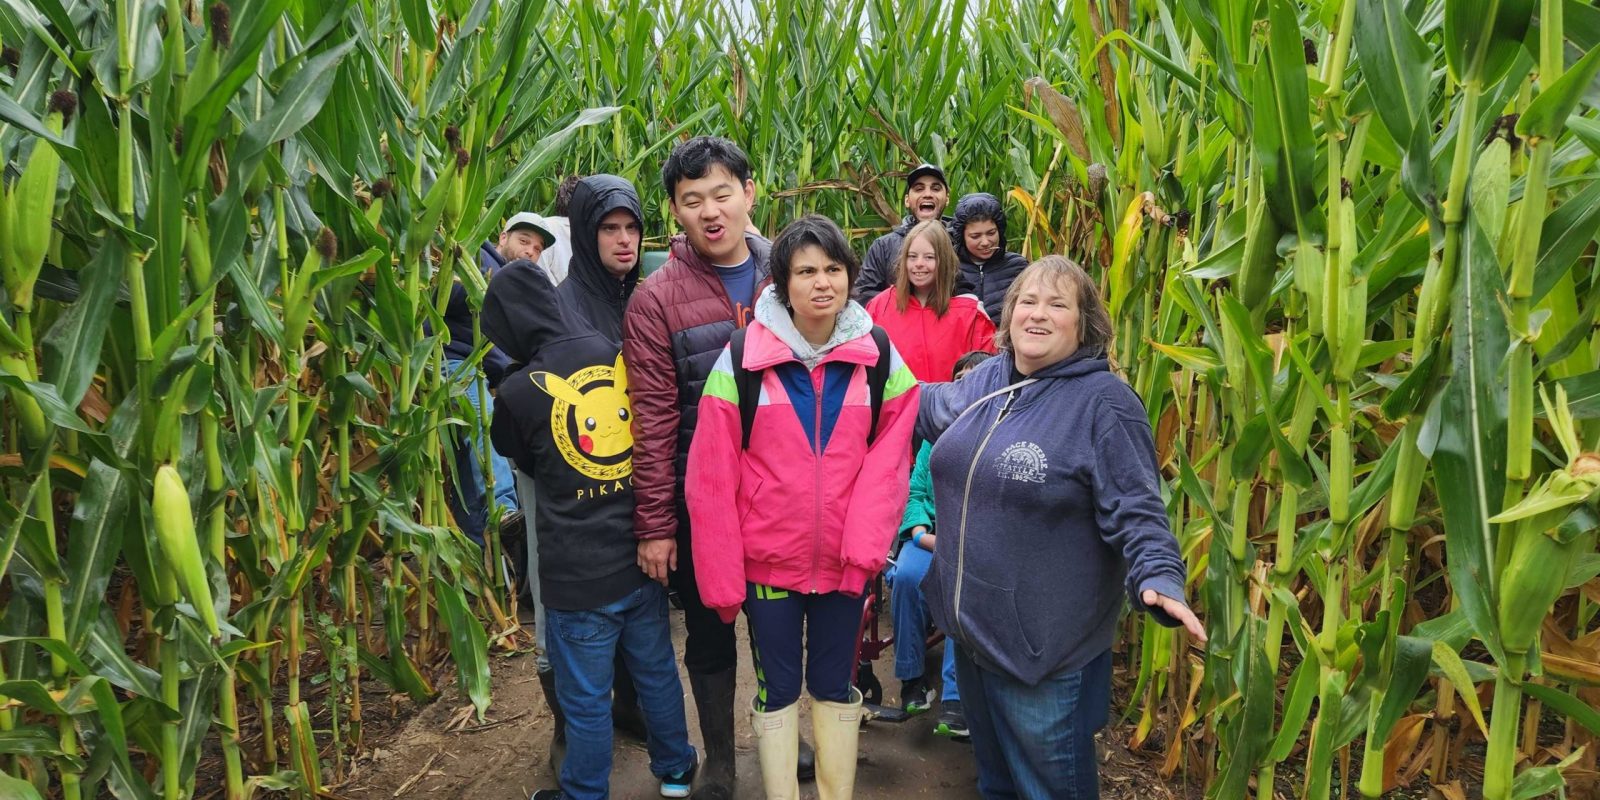 A group of Tavon members posing in between two walls of corn in a corn maze